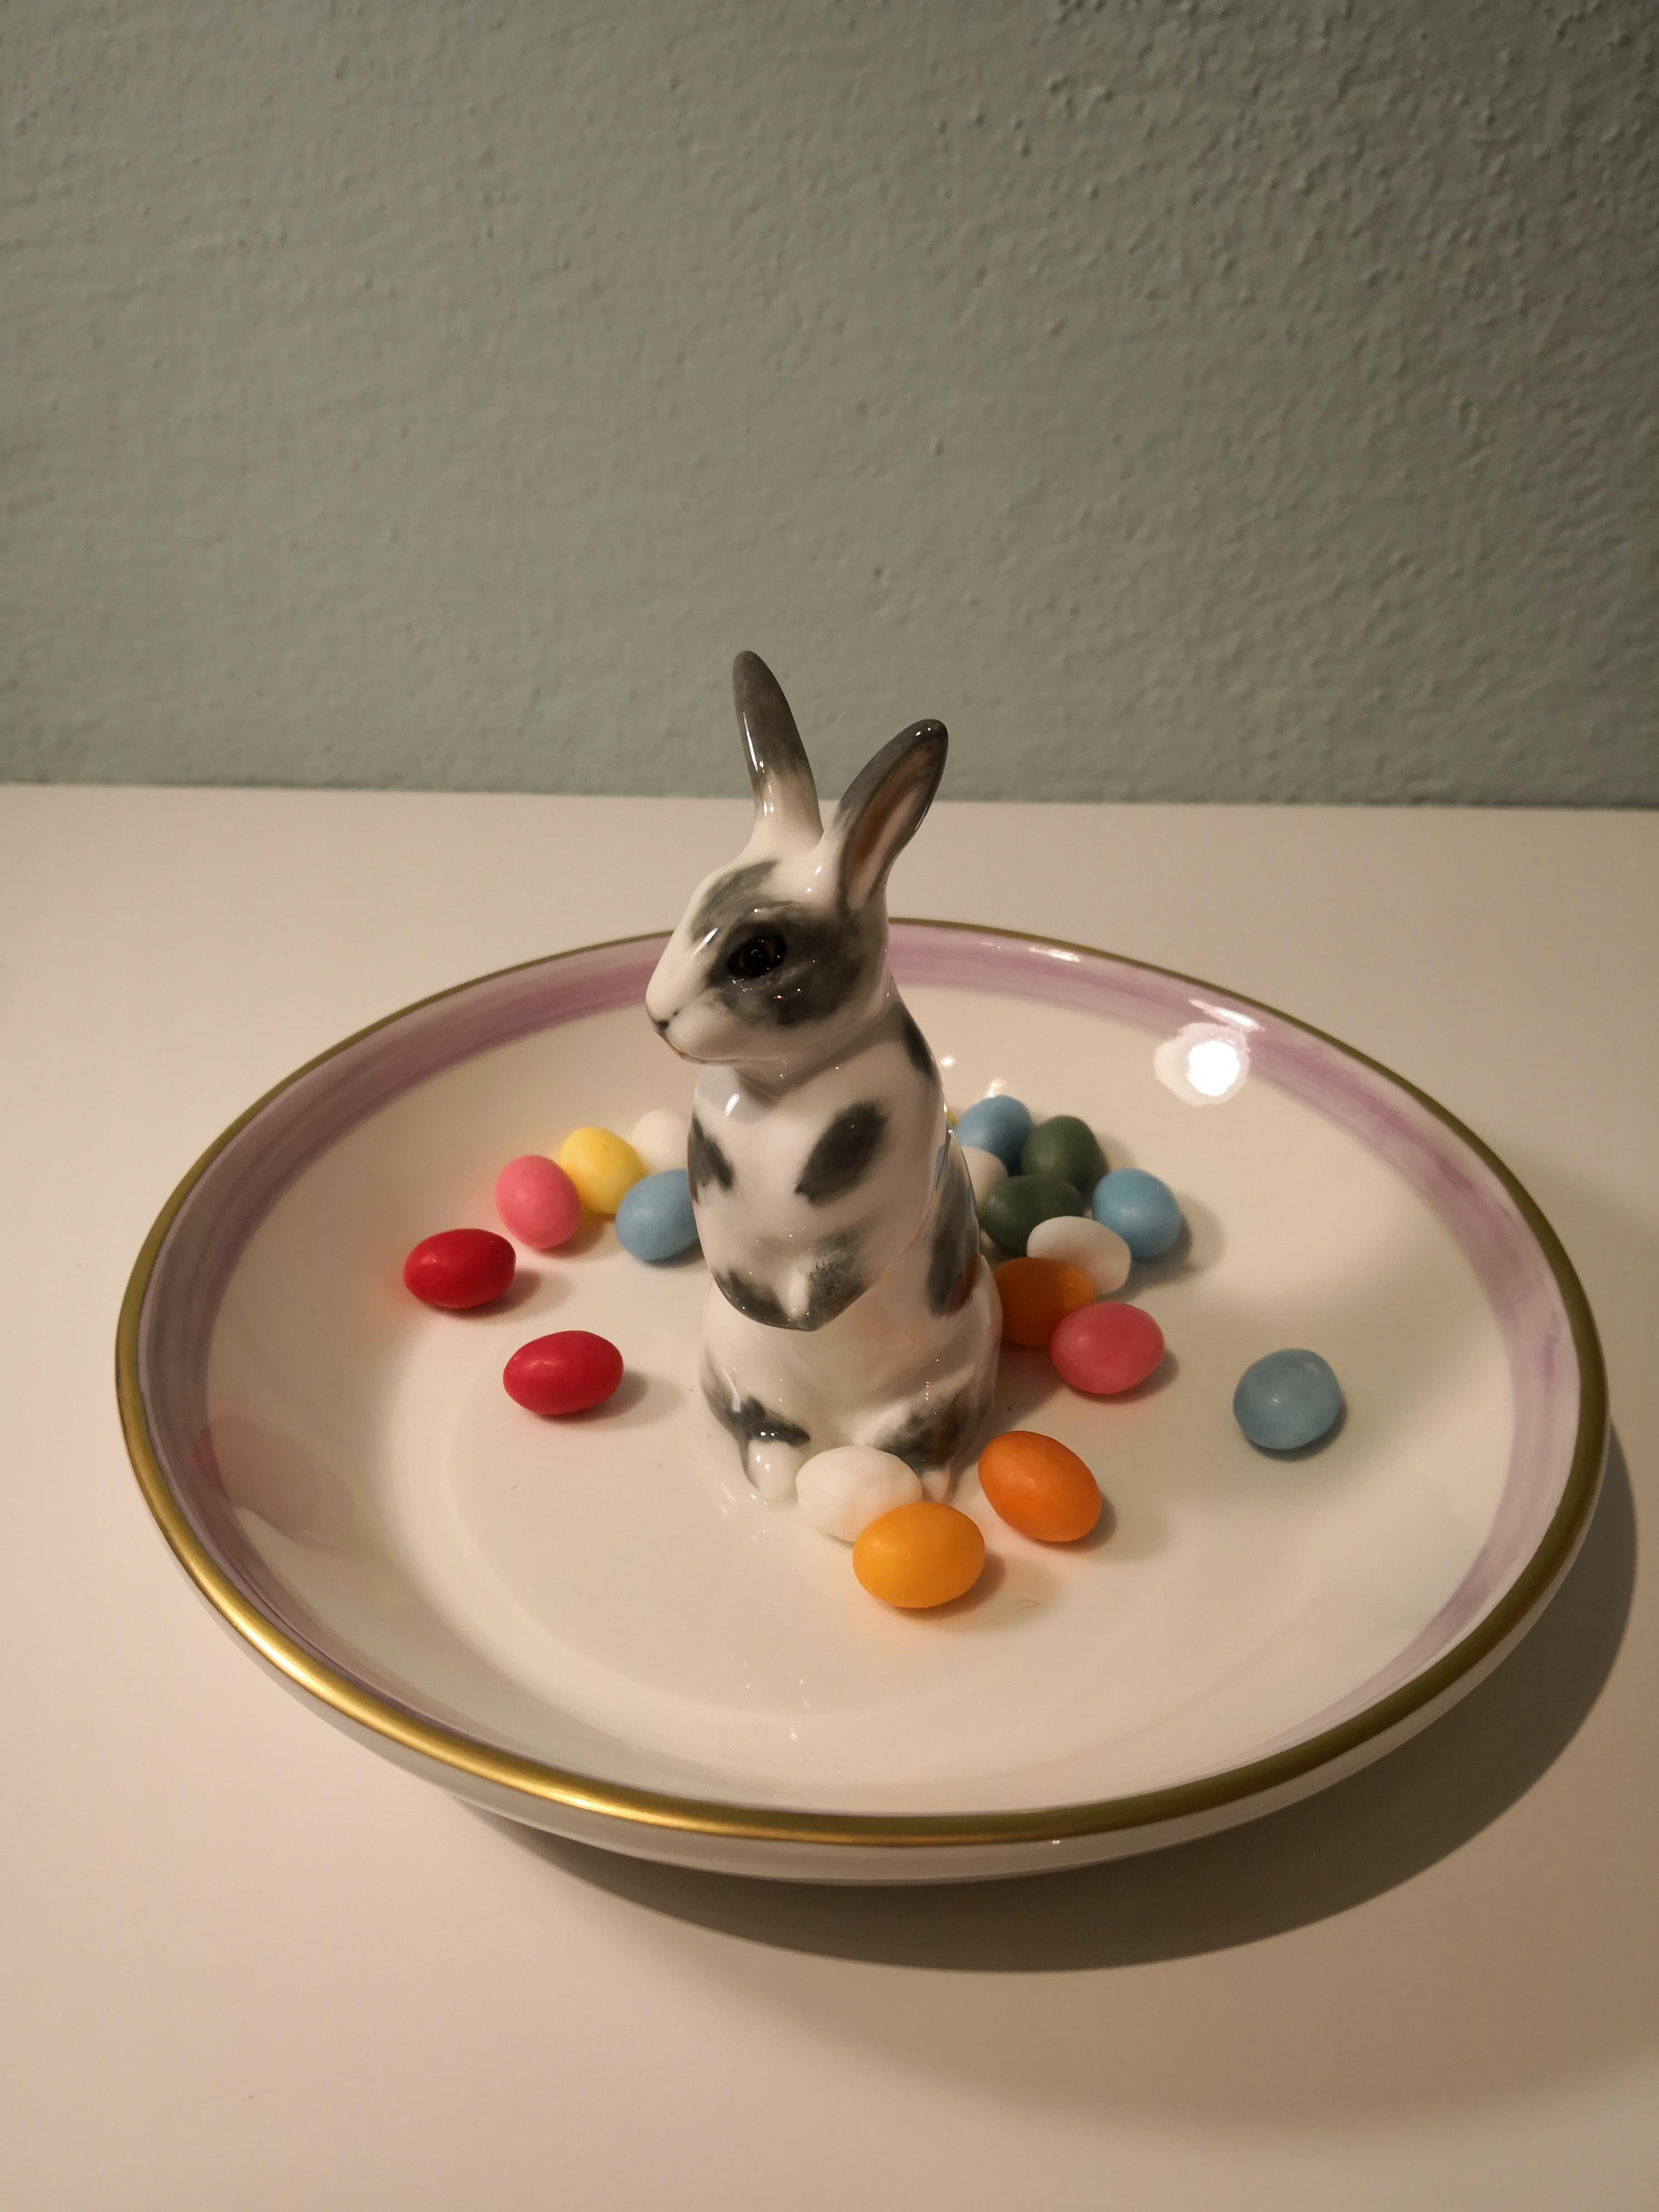 Country Style Porcelain Bowl with Bunny Figure Sofina Boutique Kitzbuehel 1